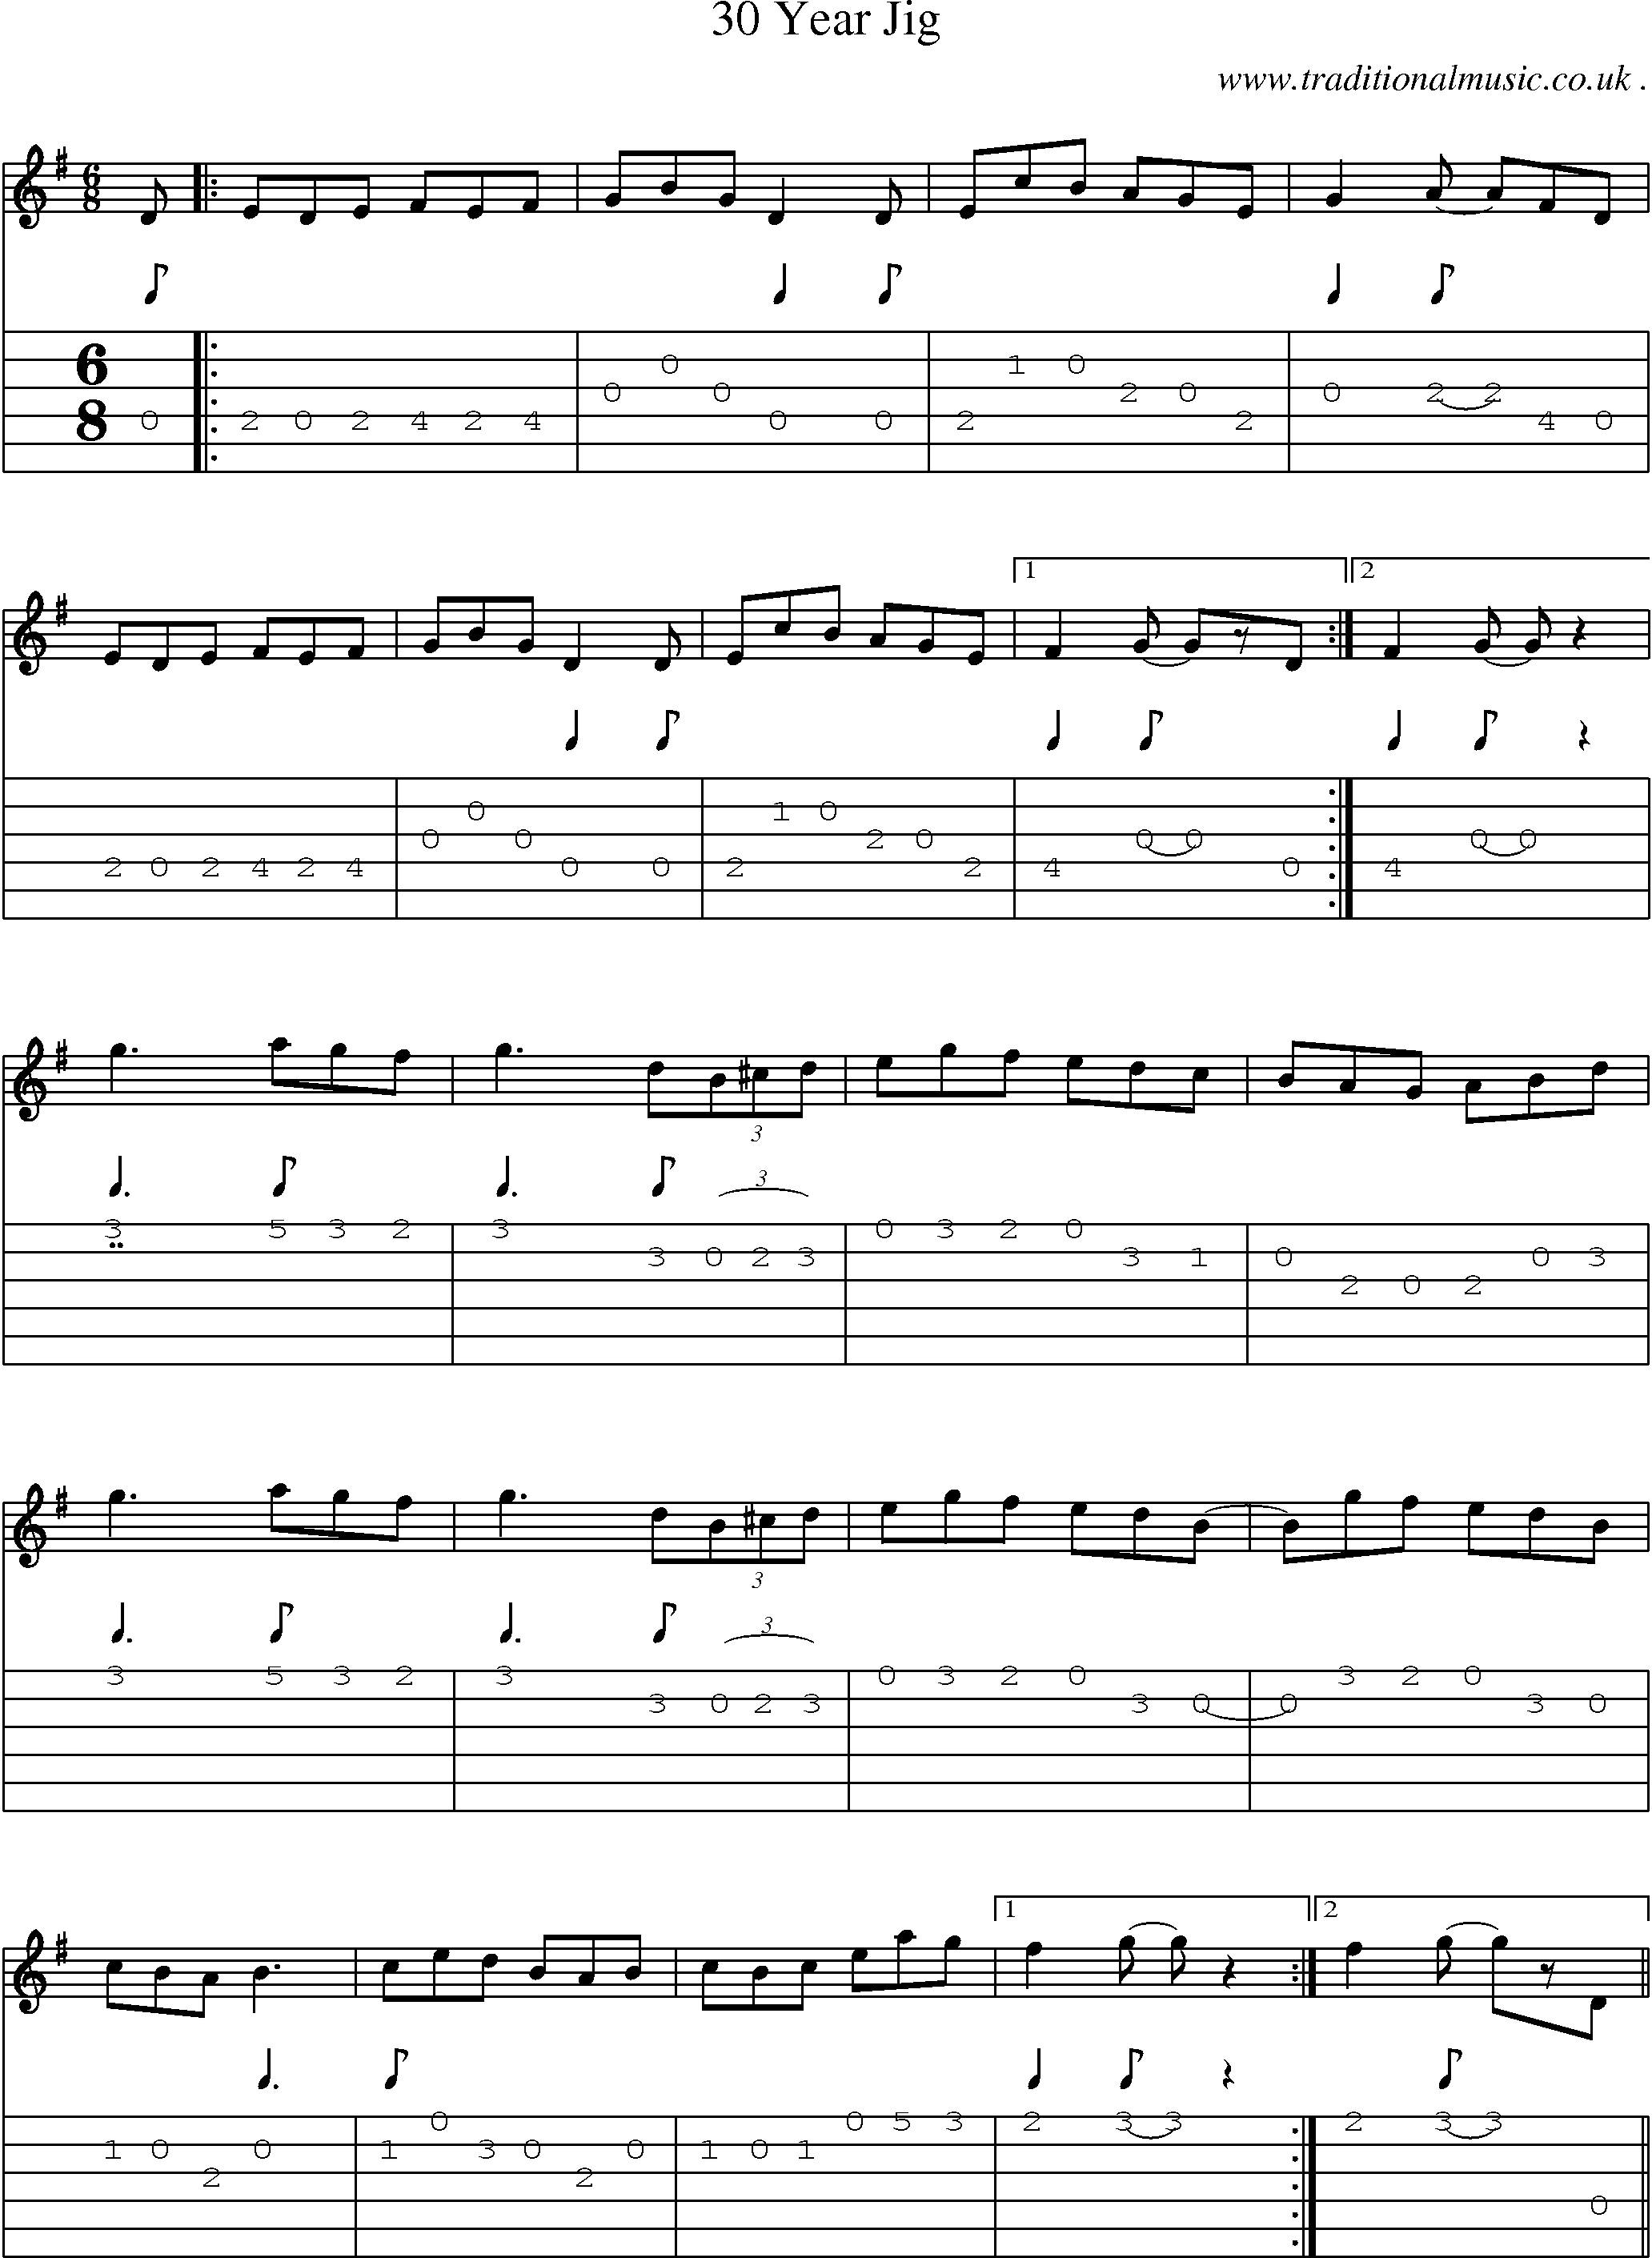 Sheet-Music and Guitar Tabs for 30 Year Jig